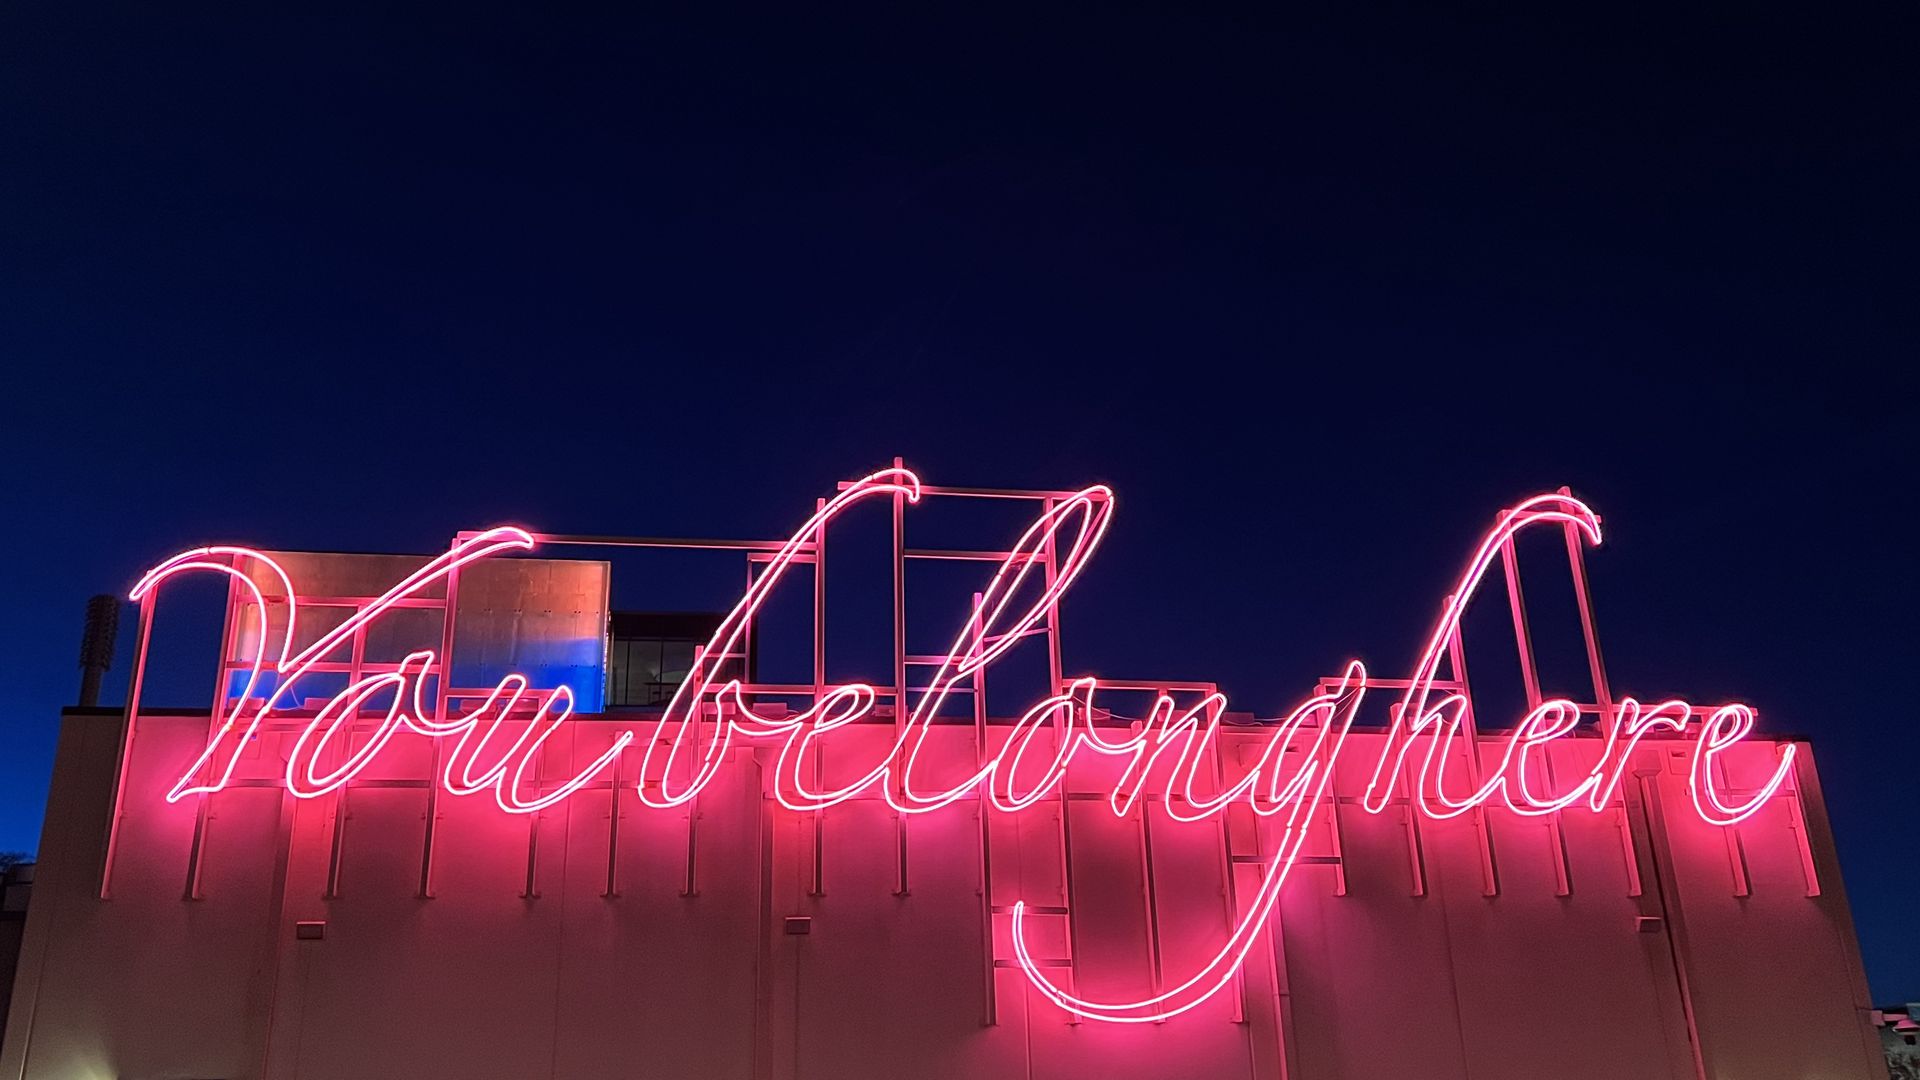 pink neon sign that reads in script "You belong here"